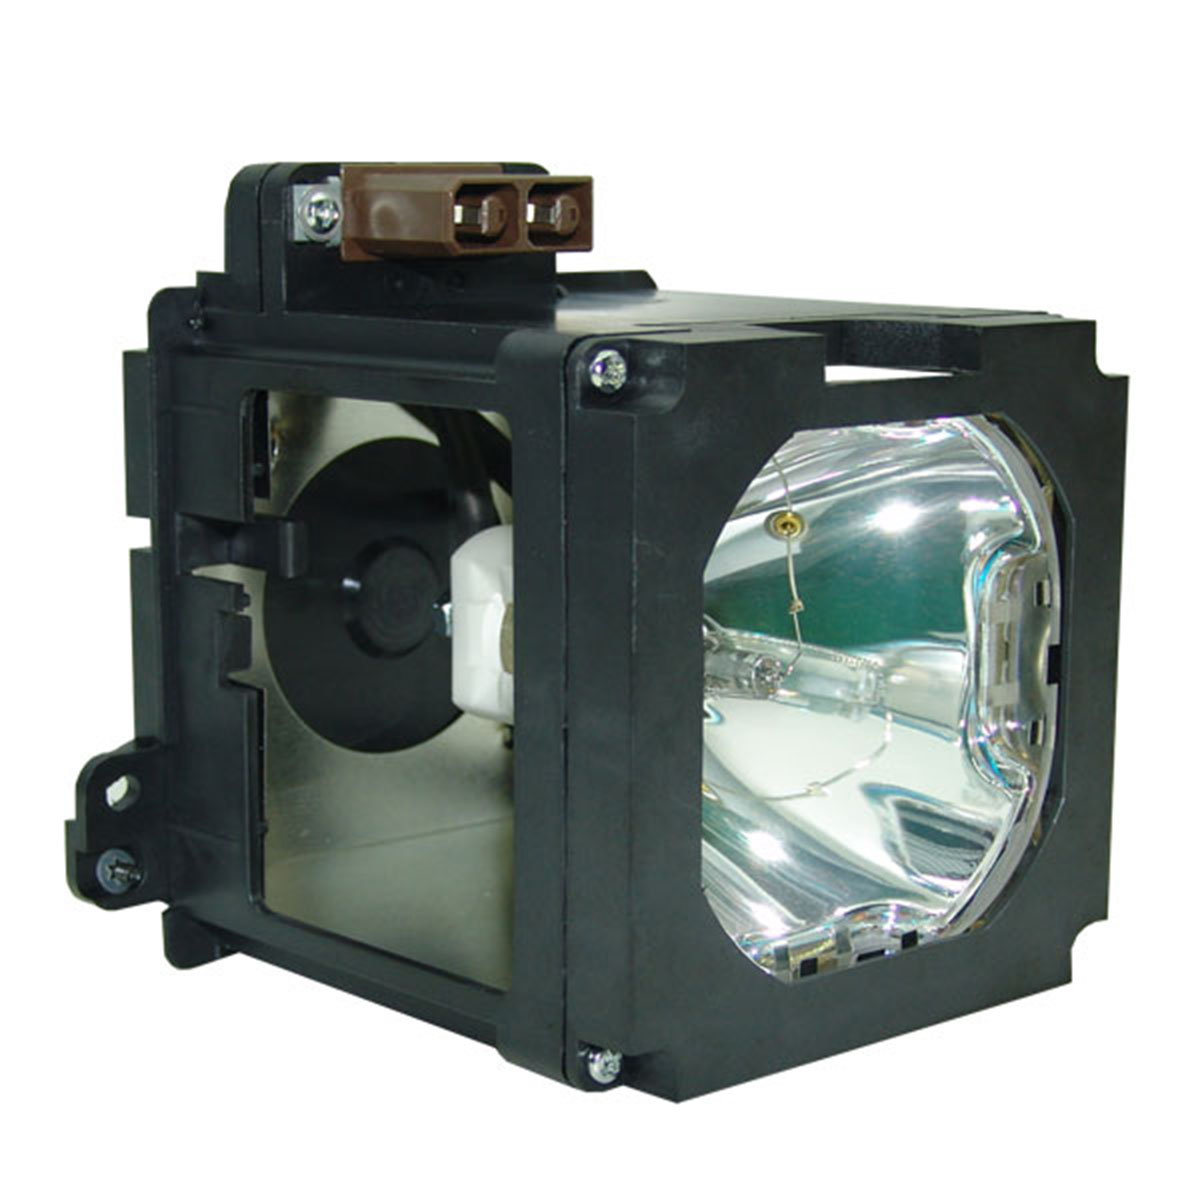 Lamp & Housing for the Yamaha DPX-1300 Projector - 90 Day Warranty - image 1 of 6